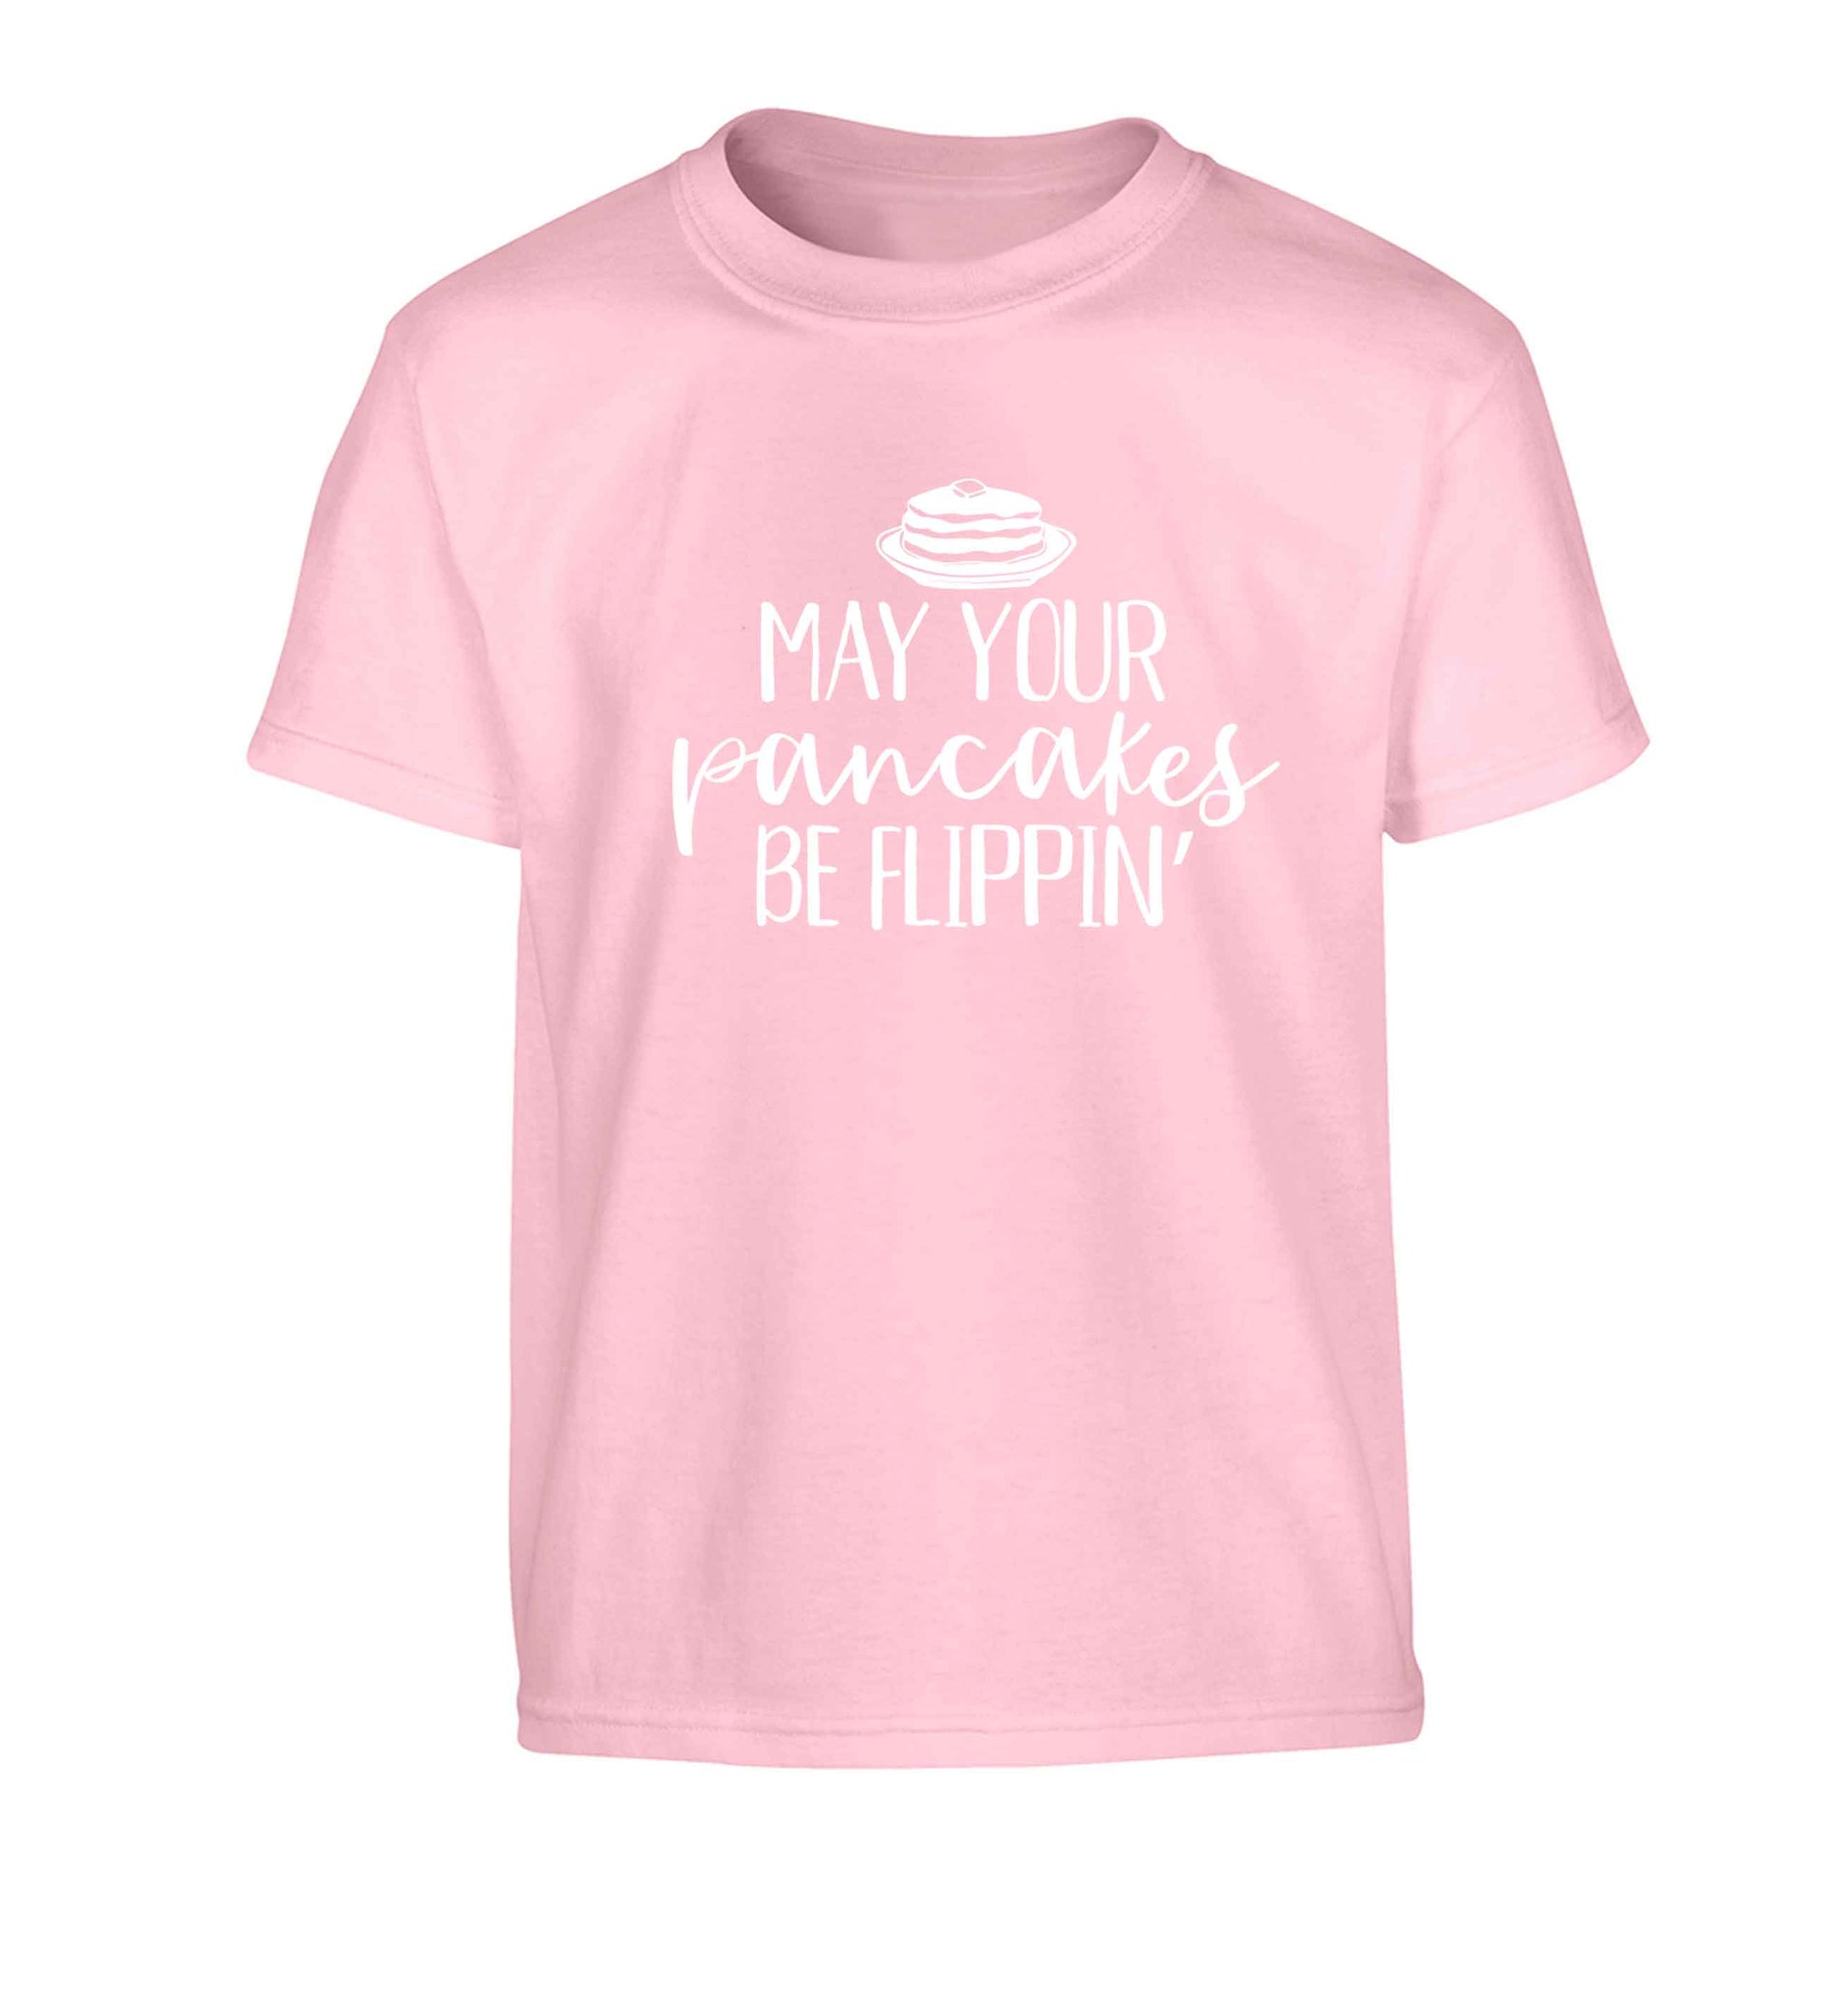 May your pancakes be flippin' Children's light pink Tshirt 12-13 Years